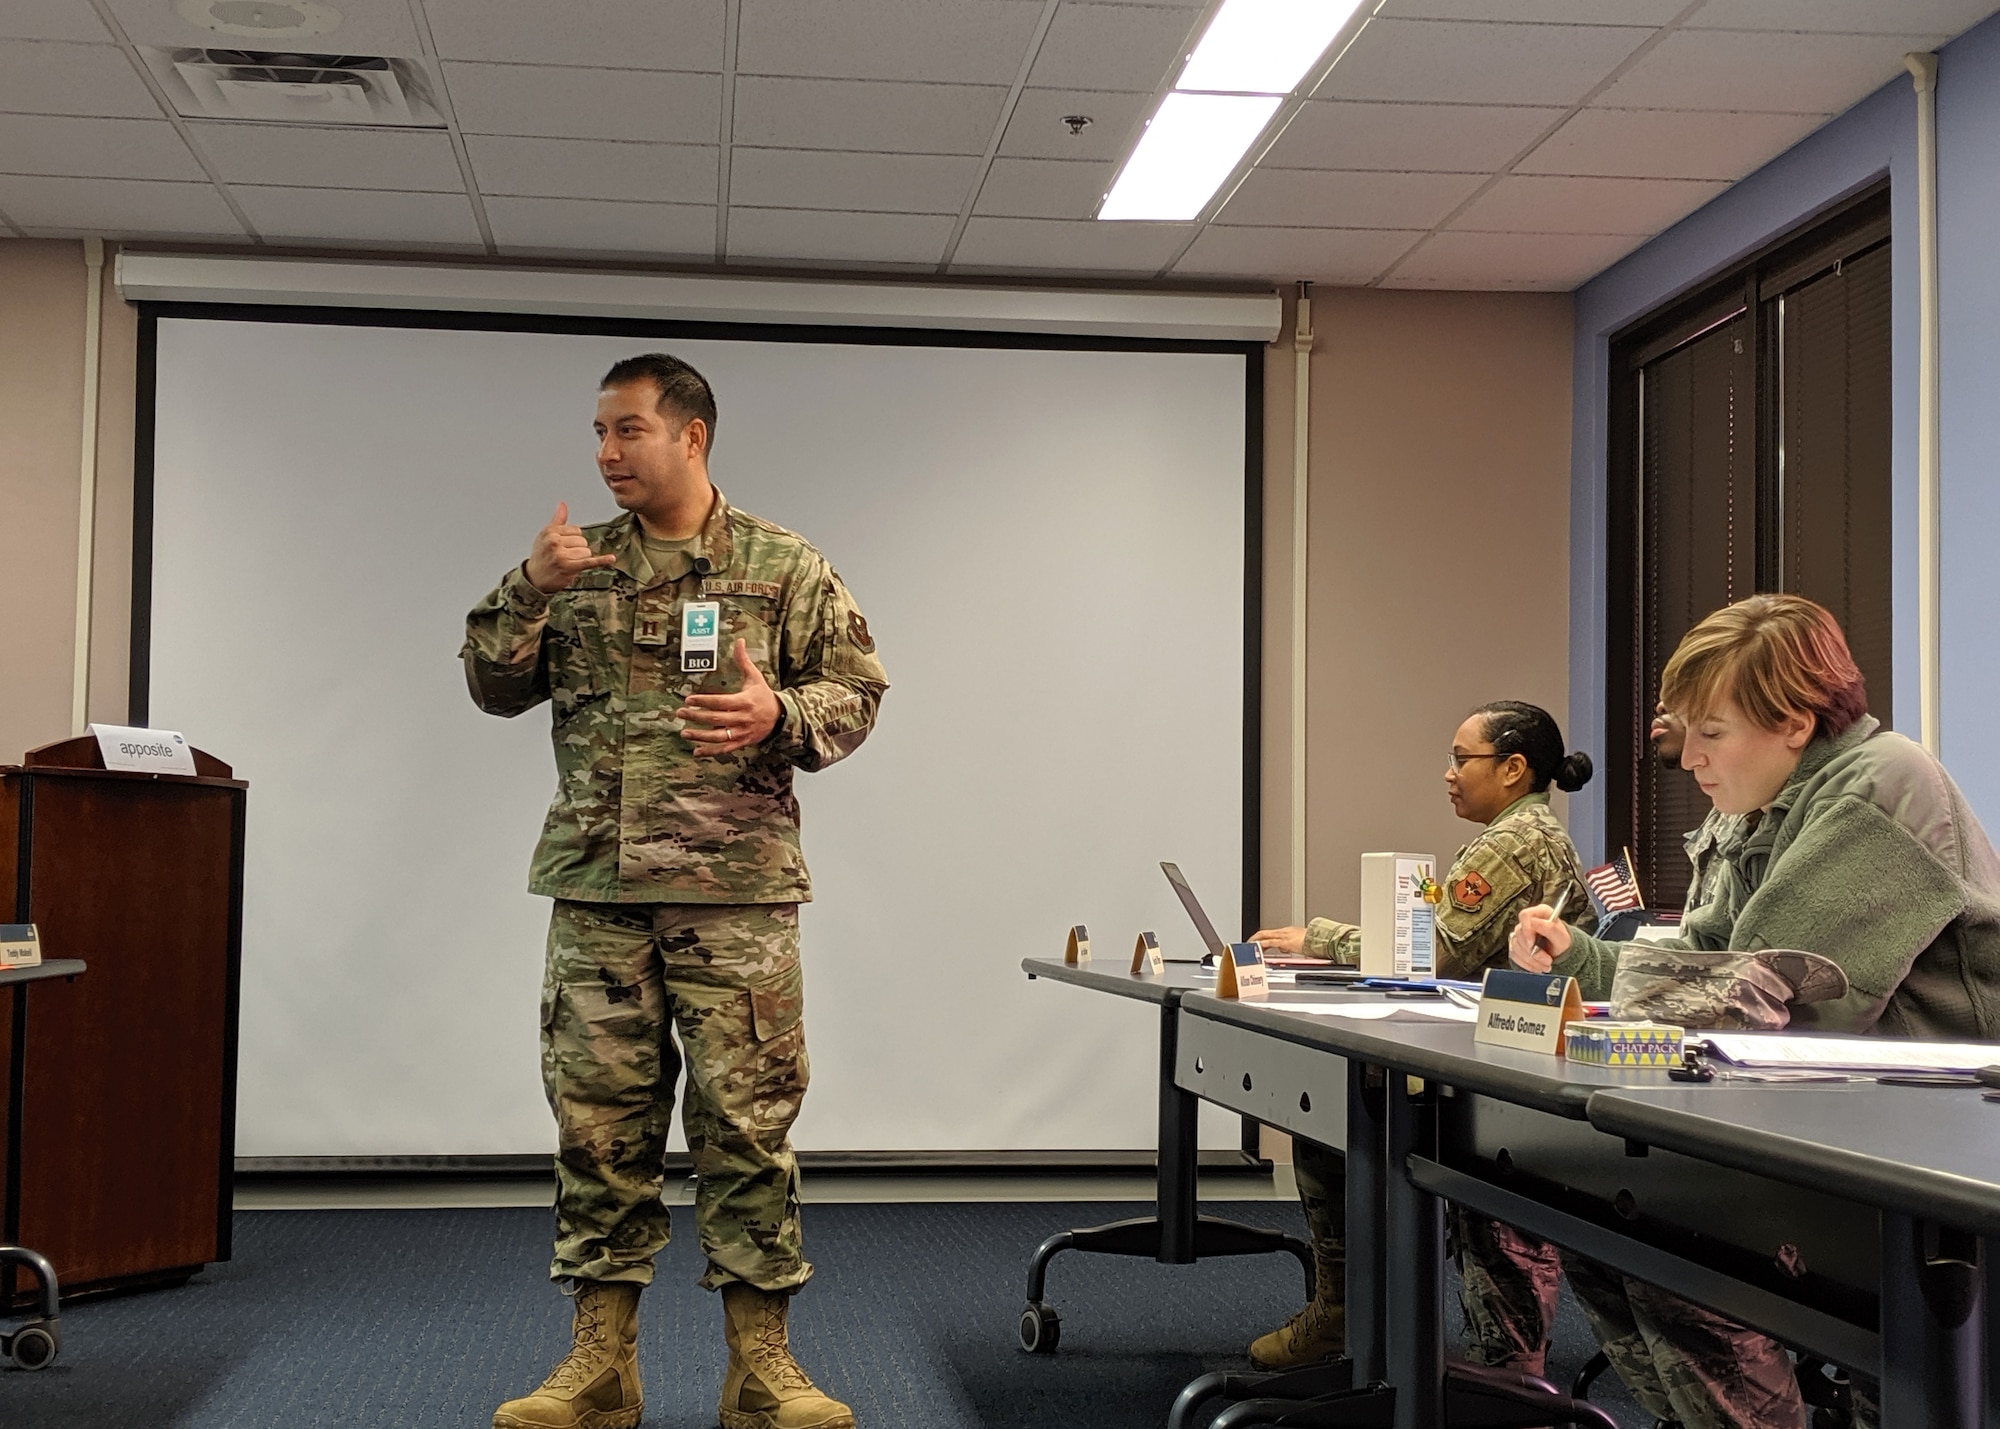 Capt. Eduardo Artiga, the Bioenvironmental Engineering flight commander at the 47th Operational Medical Readiness Squadron at the 47th Medical Group, gives a speech during a Toastmasters meeting on Nov. 13, 2019 at Laughlin Air Force Base, Texas. Laughlin Toastmasters is open to all ranks and civilians who have base access. (U.S. Air Force photo by Senior Airman John A. Crawford)